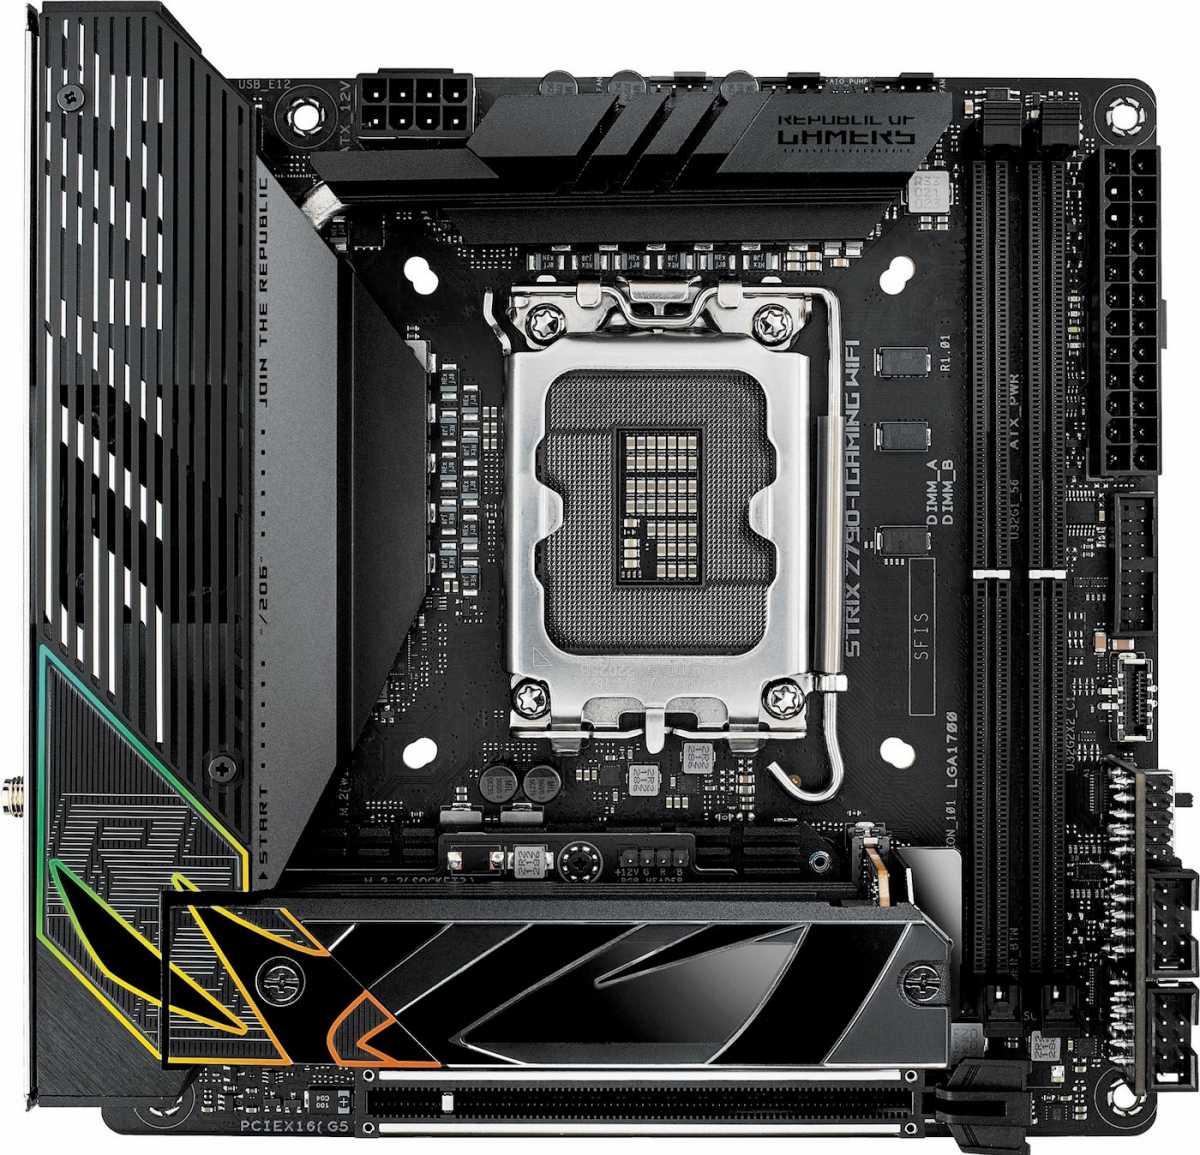 Micro-ATX vs. Mini-ITX: Pros and cons for tiny motherboards